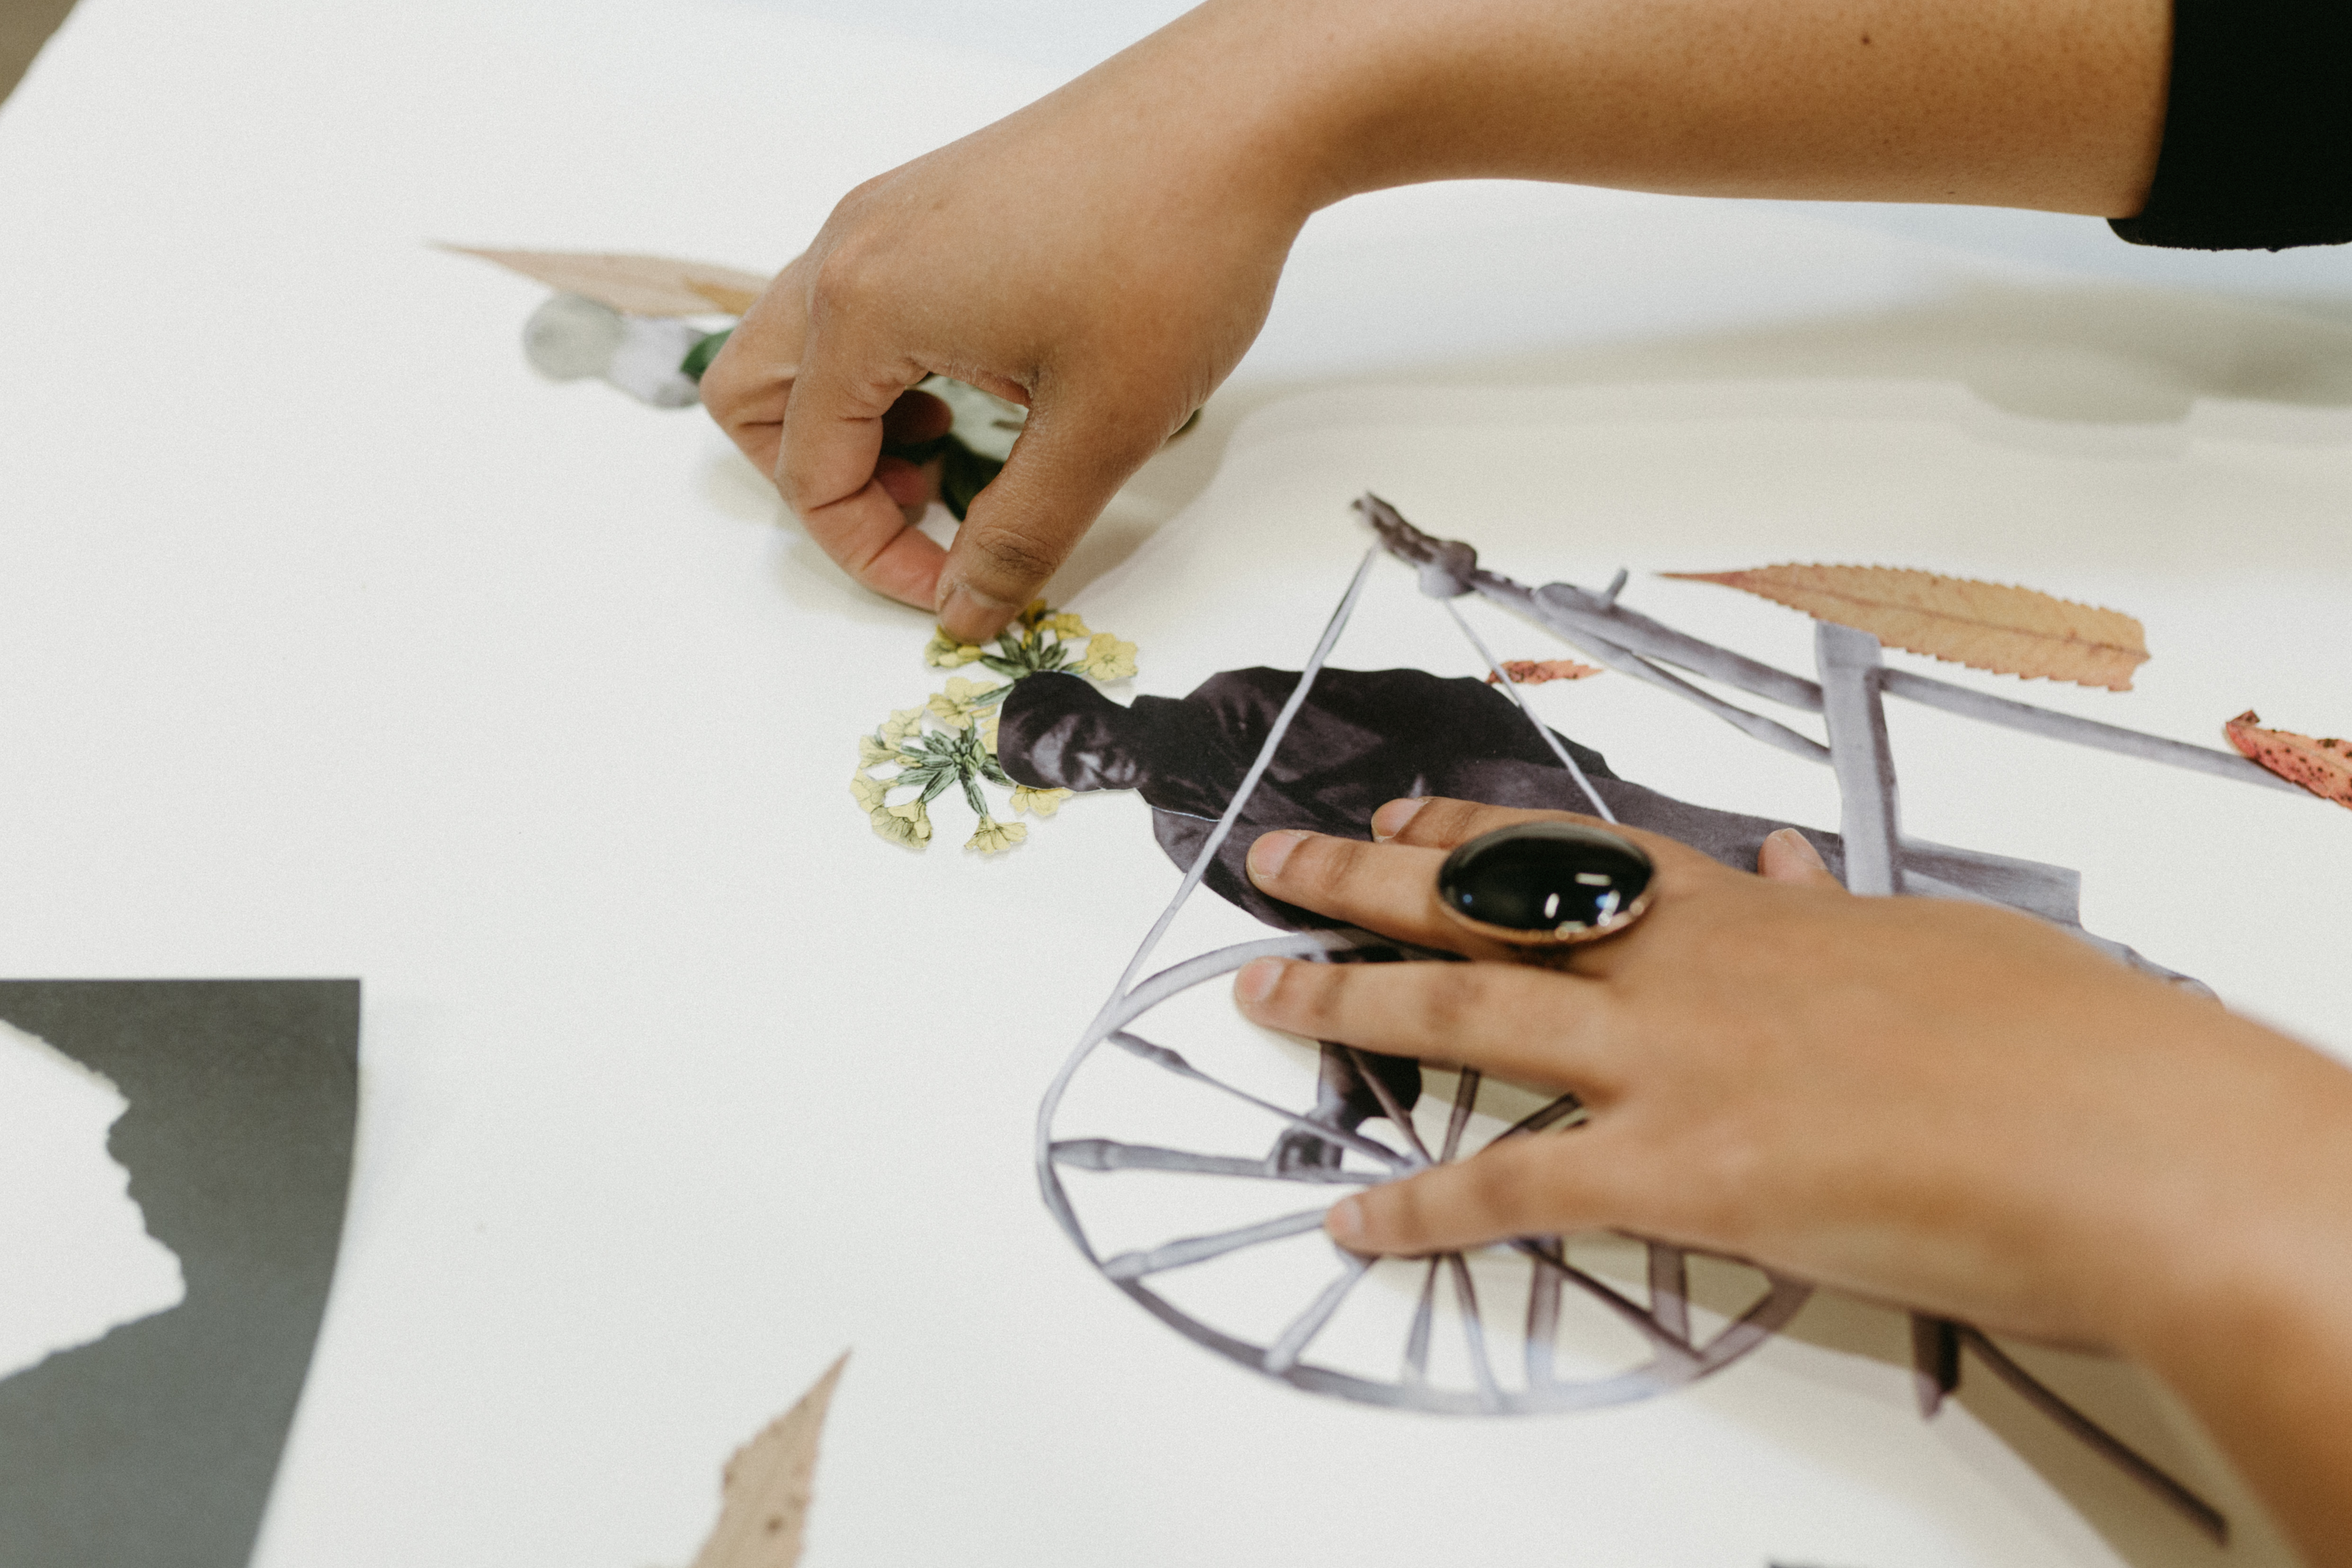 Close up image of Anthony's in-process collage work. She is placing cut out image of yellow flowers on a woman's head who is working on a spindle. 